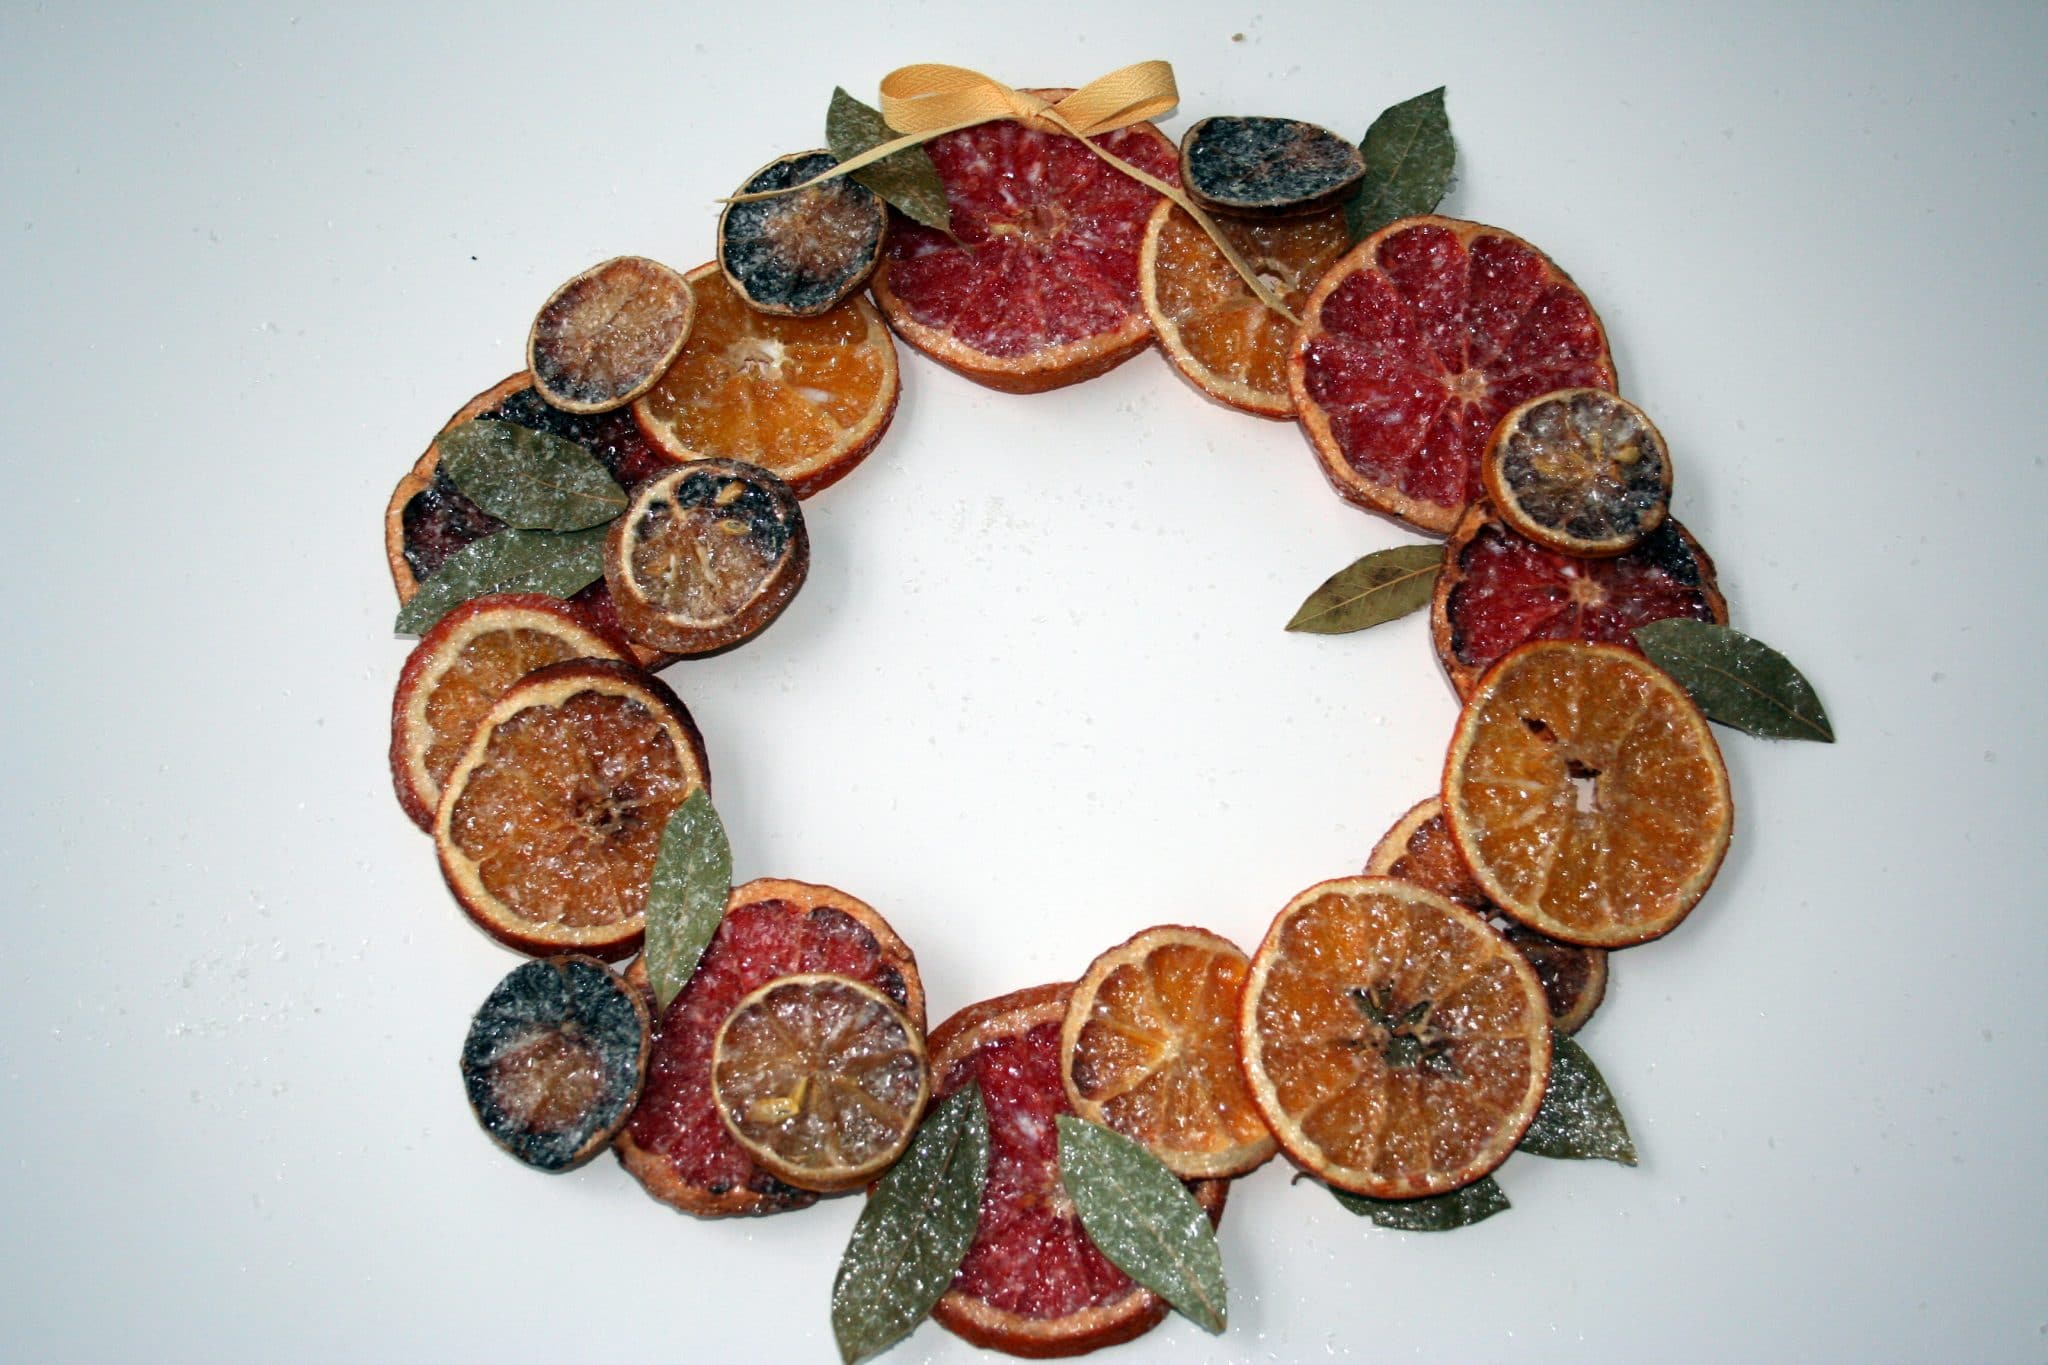 Baked Ornaments Christmas Wreath featuring oranges, blood oranges, and sage